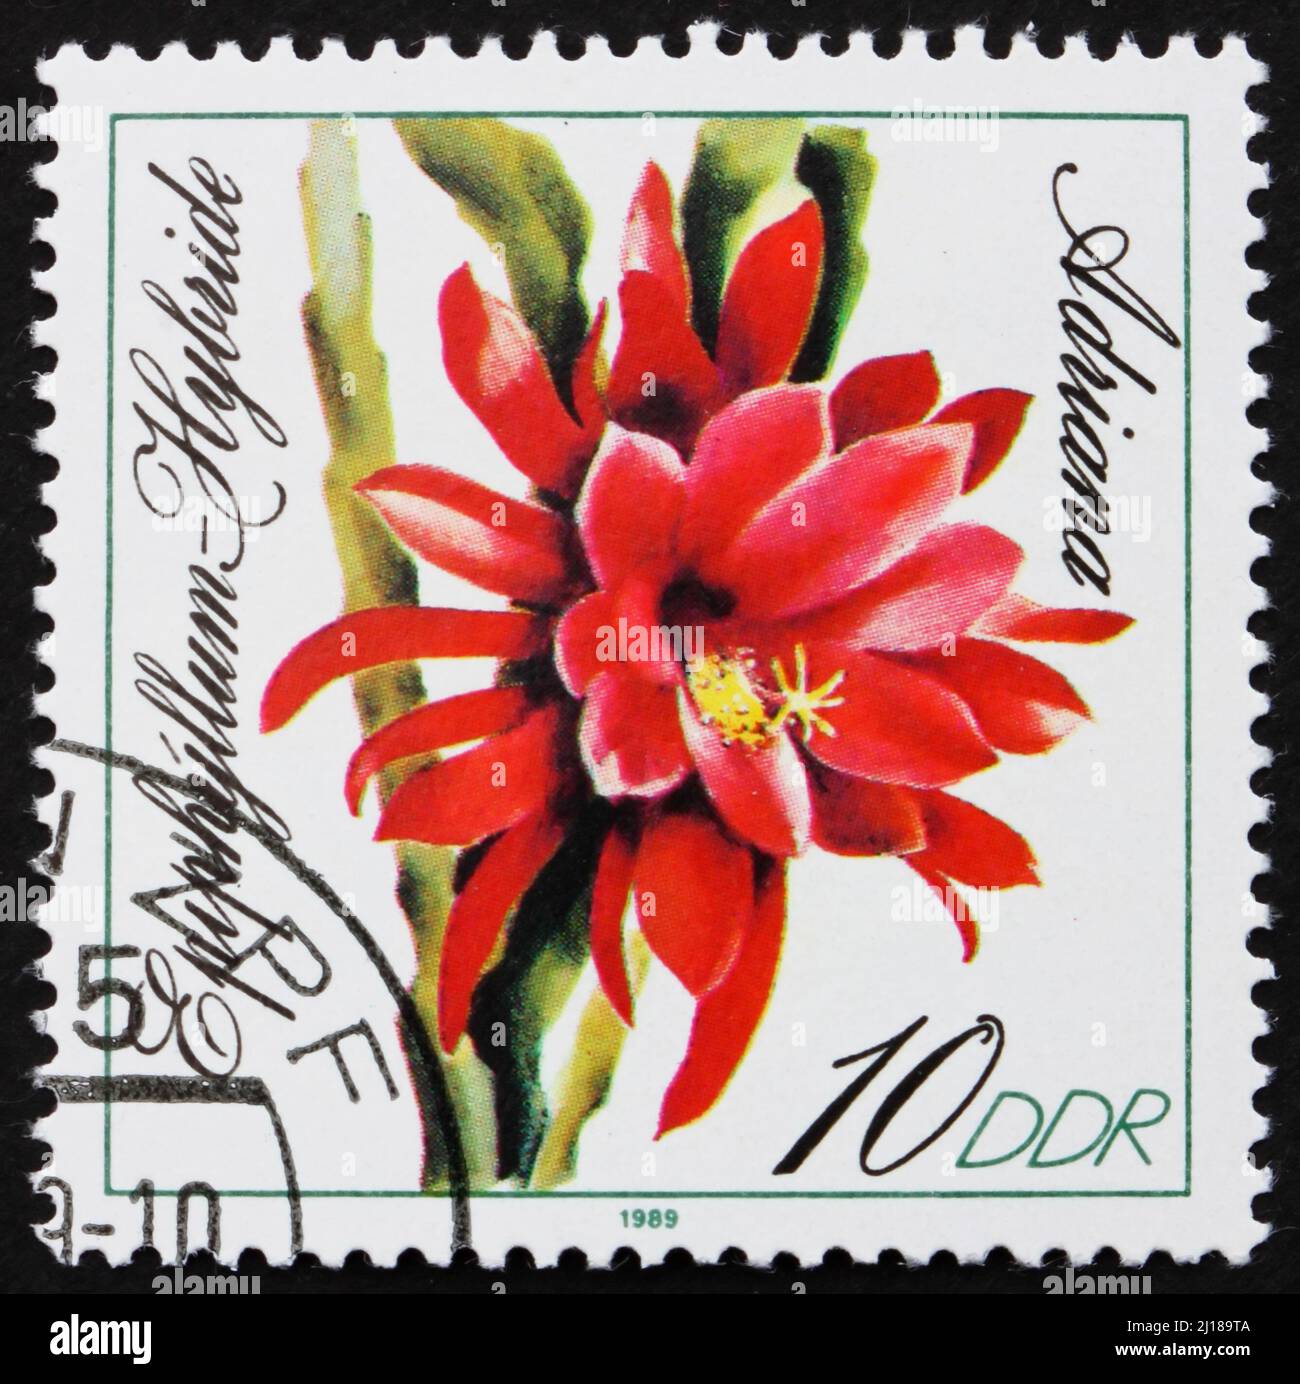 GDR - CIRCA 1989: a stamp printed in GDR shows Adriana, Epiphyllum, Flowering Cacti, circa 1989 Stock Photo